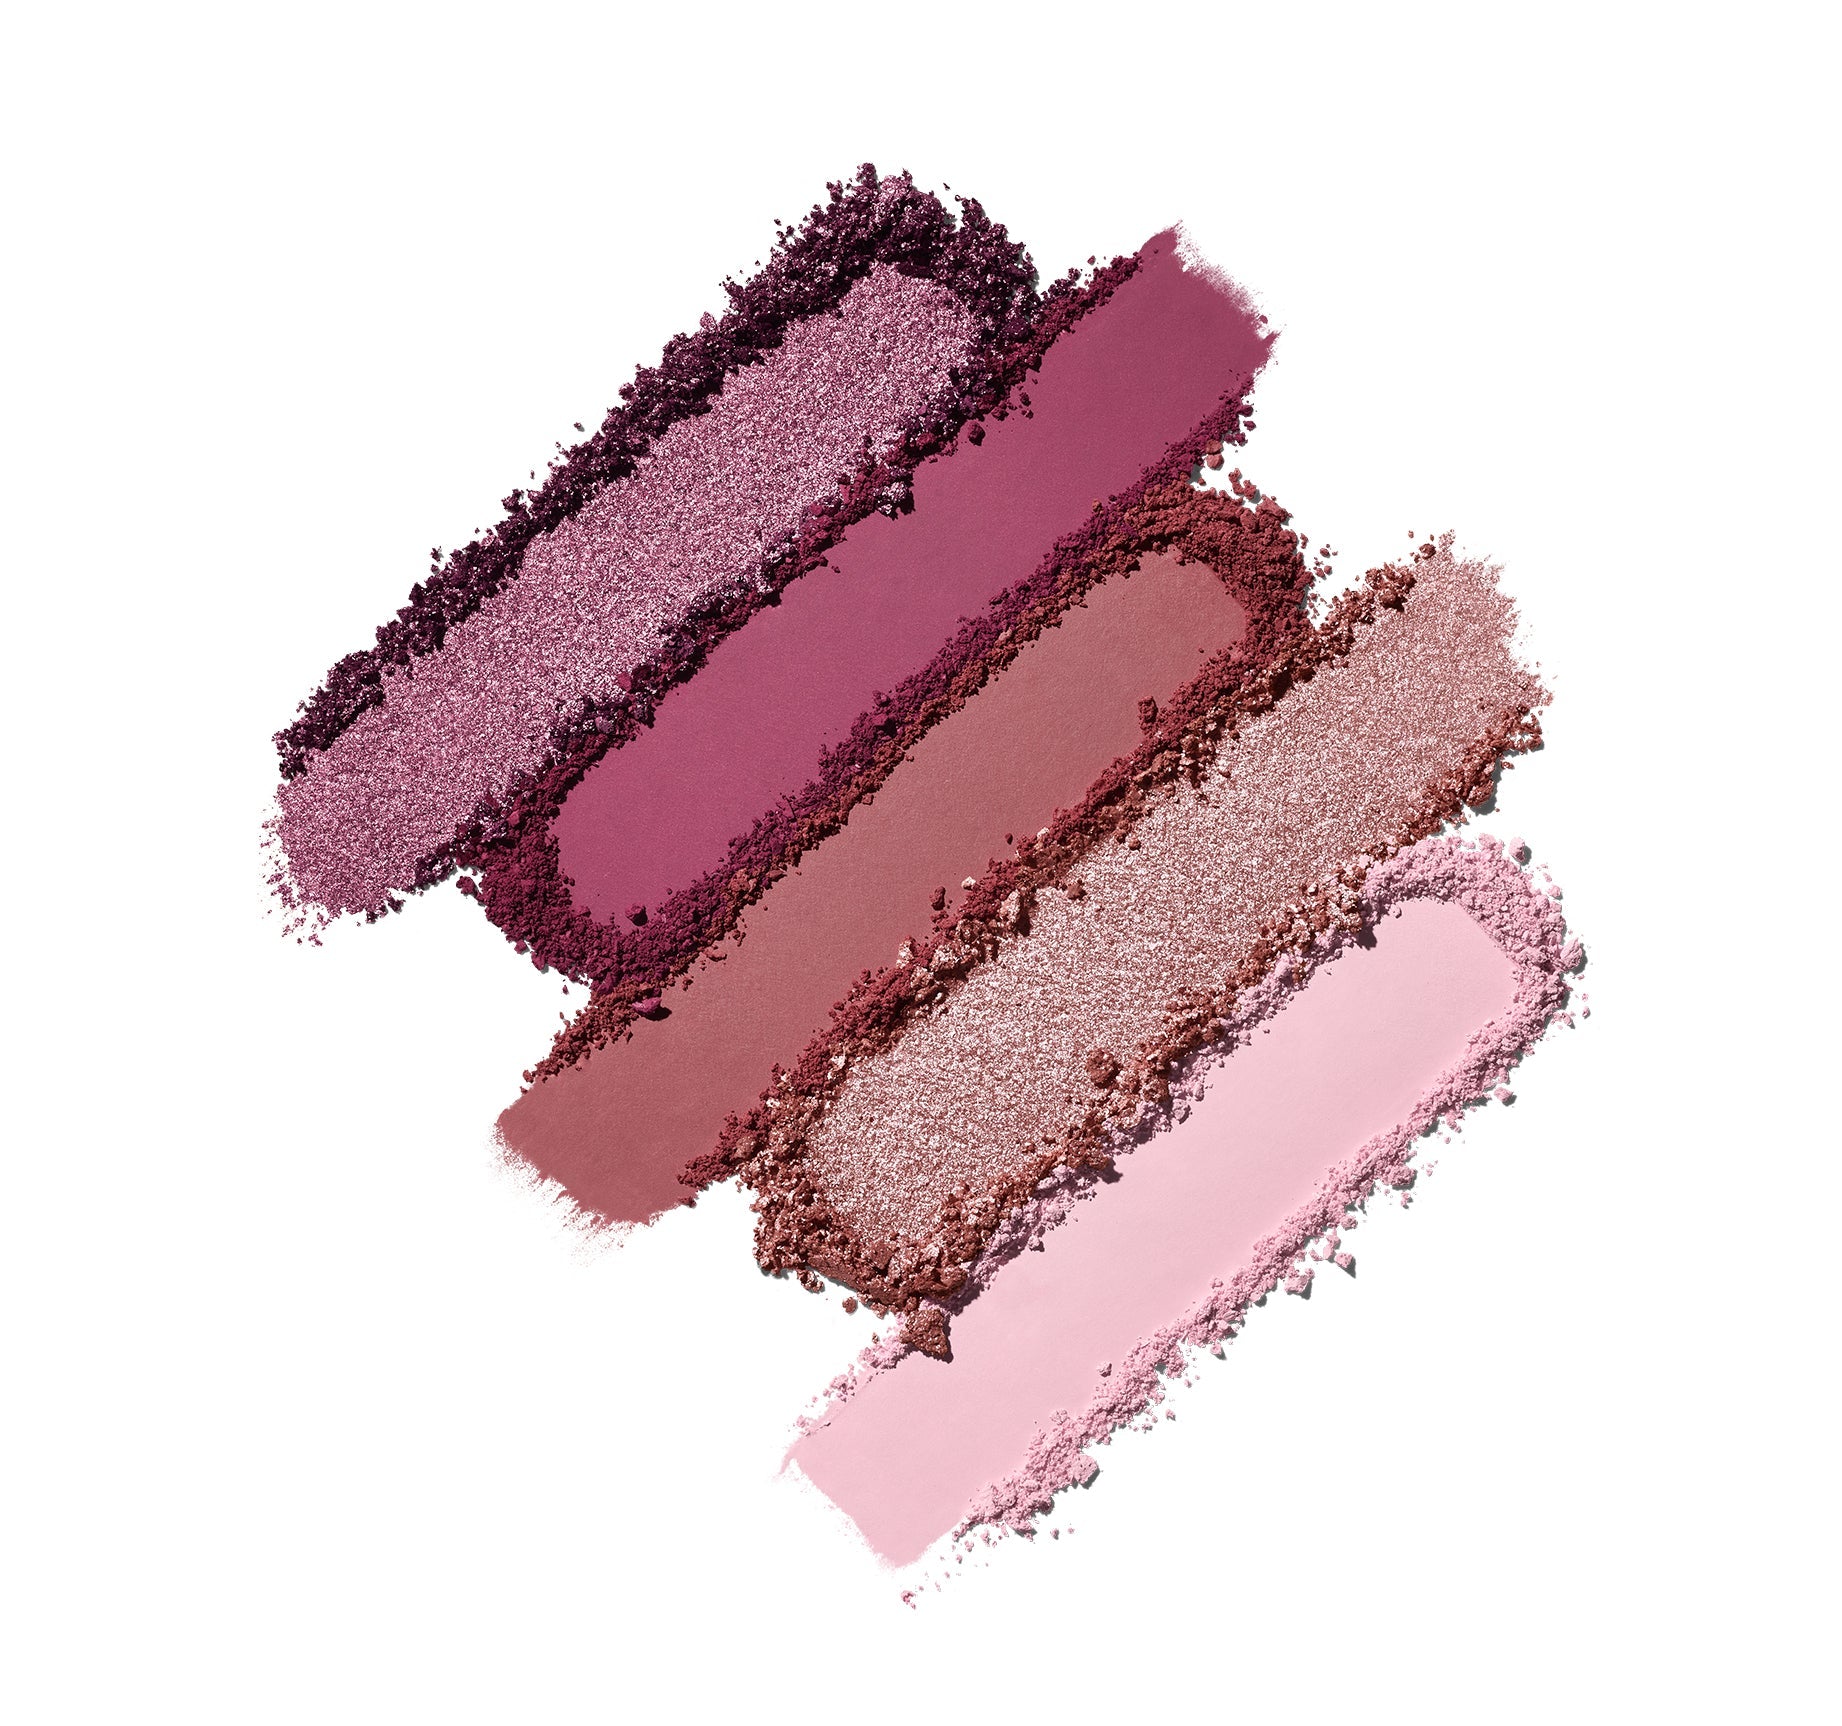 Ready In 5 Eyeshadow Palette-From Hawaii With Love - Image 2